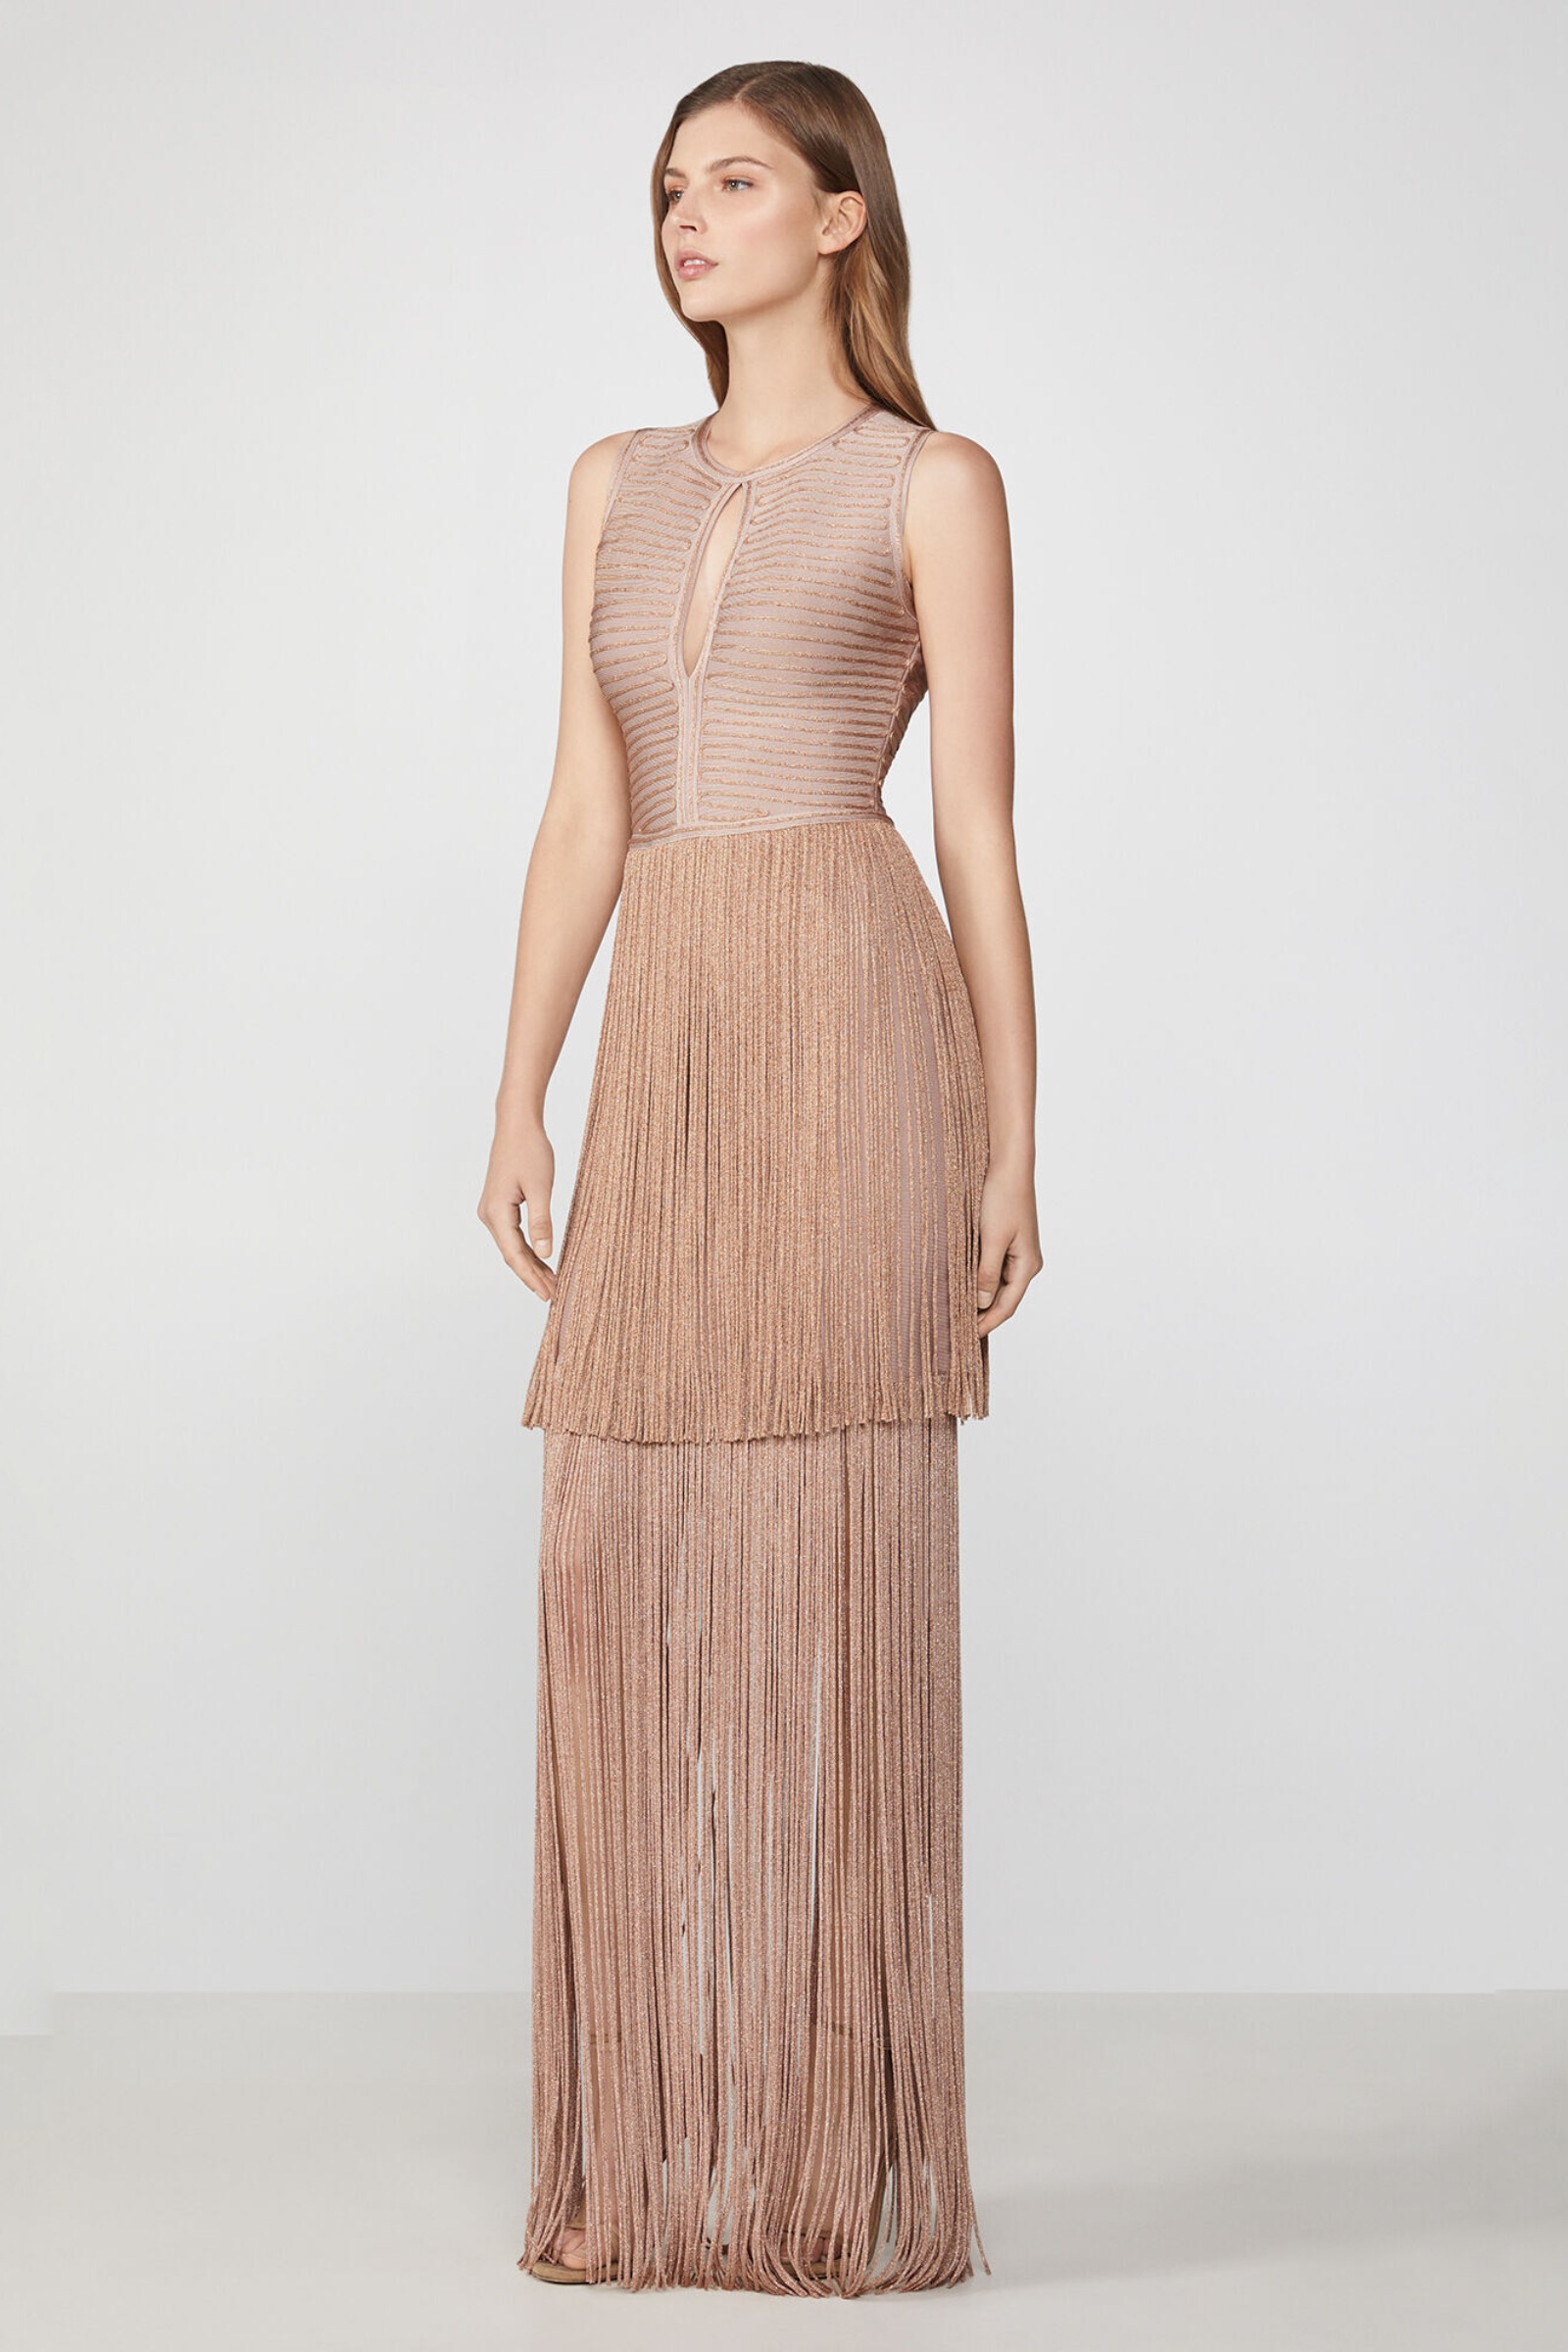 Herve Leger Bandage Cocktail Dress – Rent your Couture